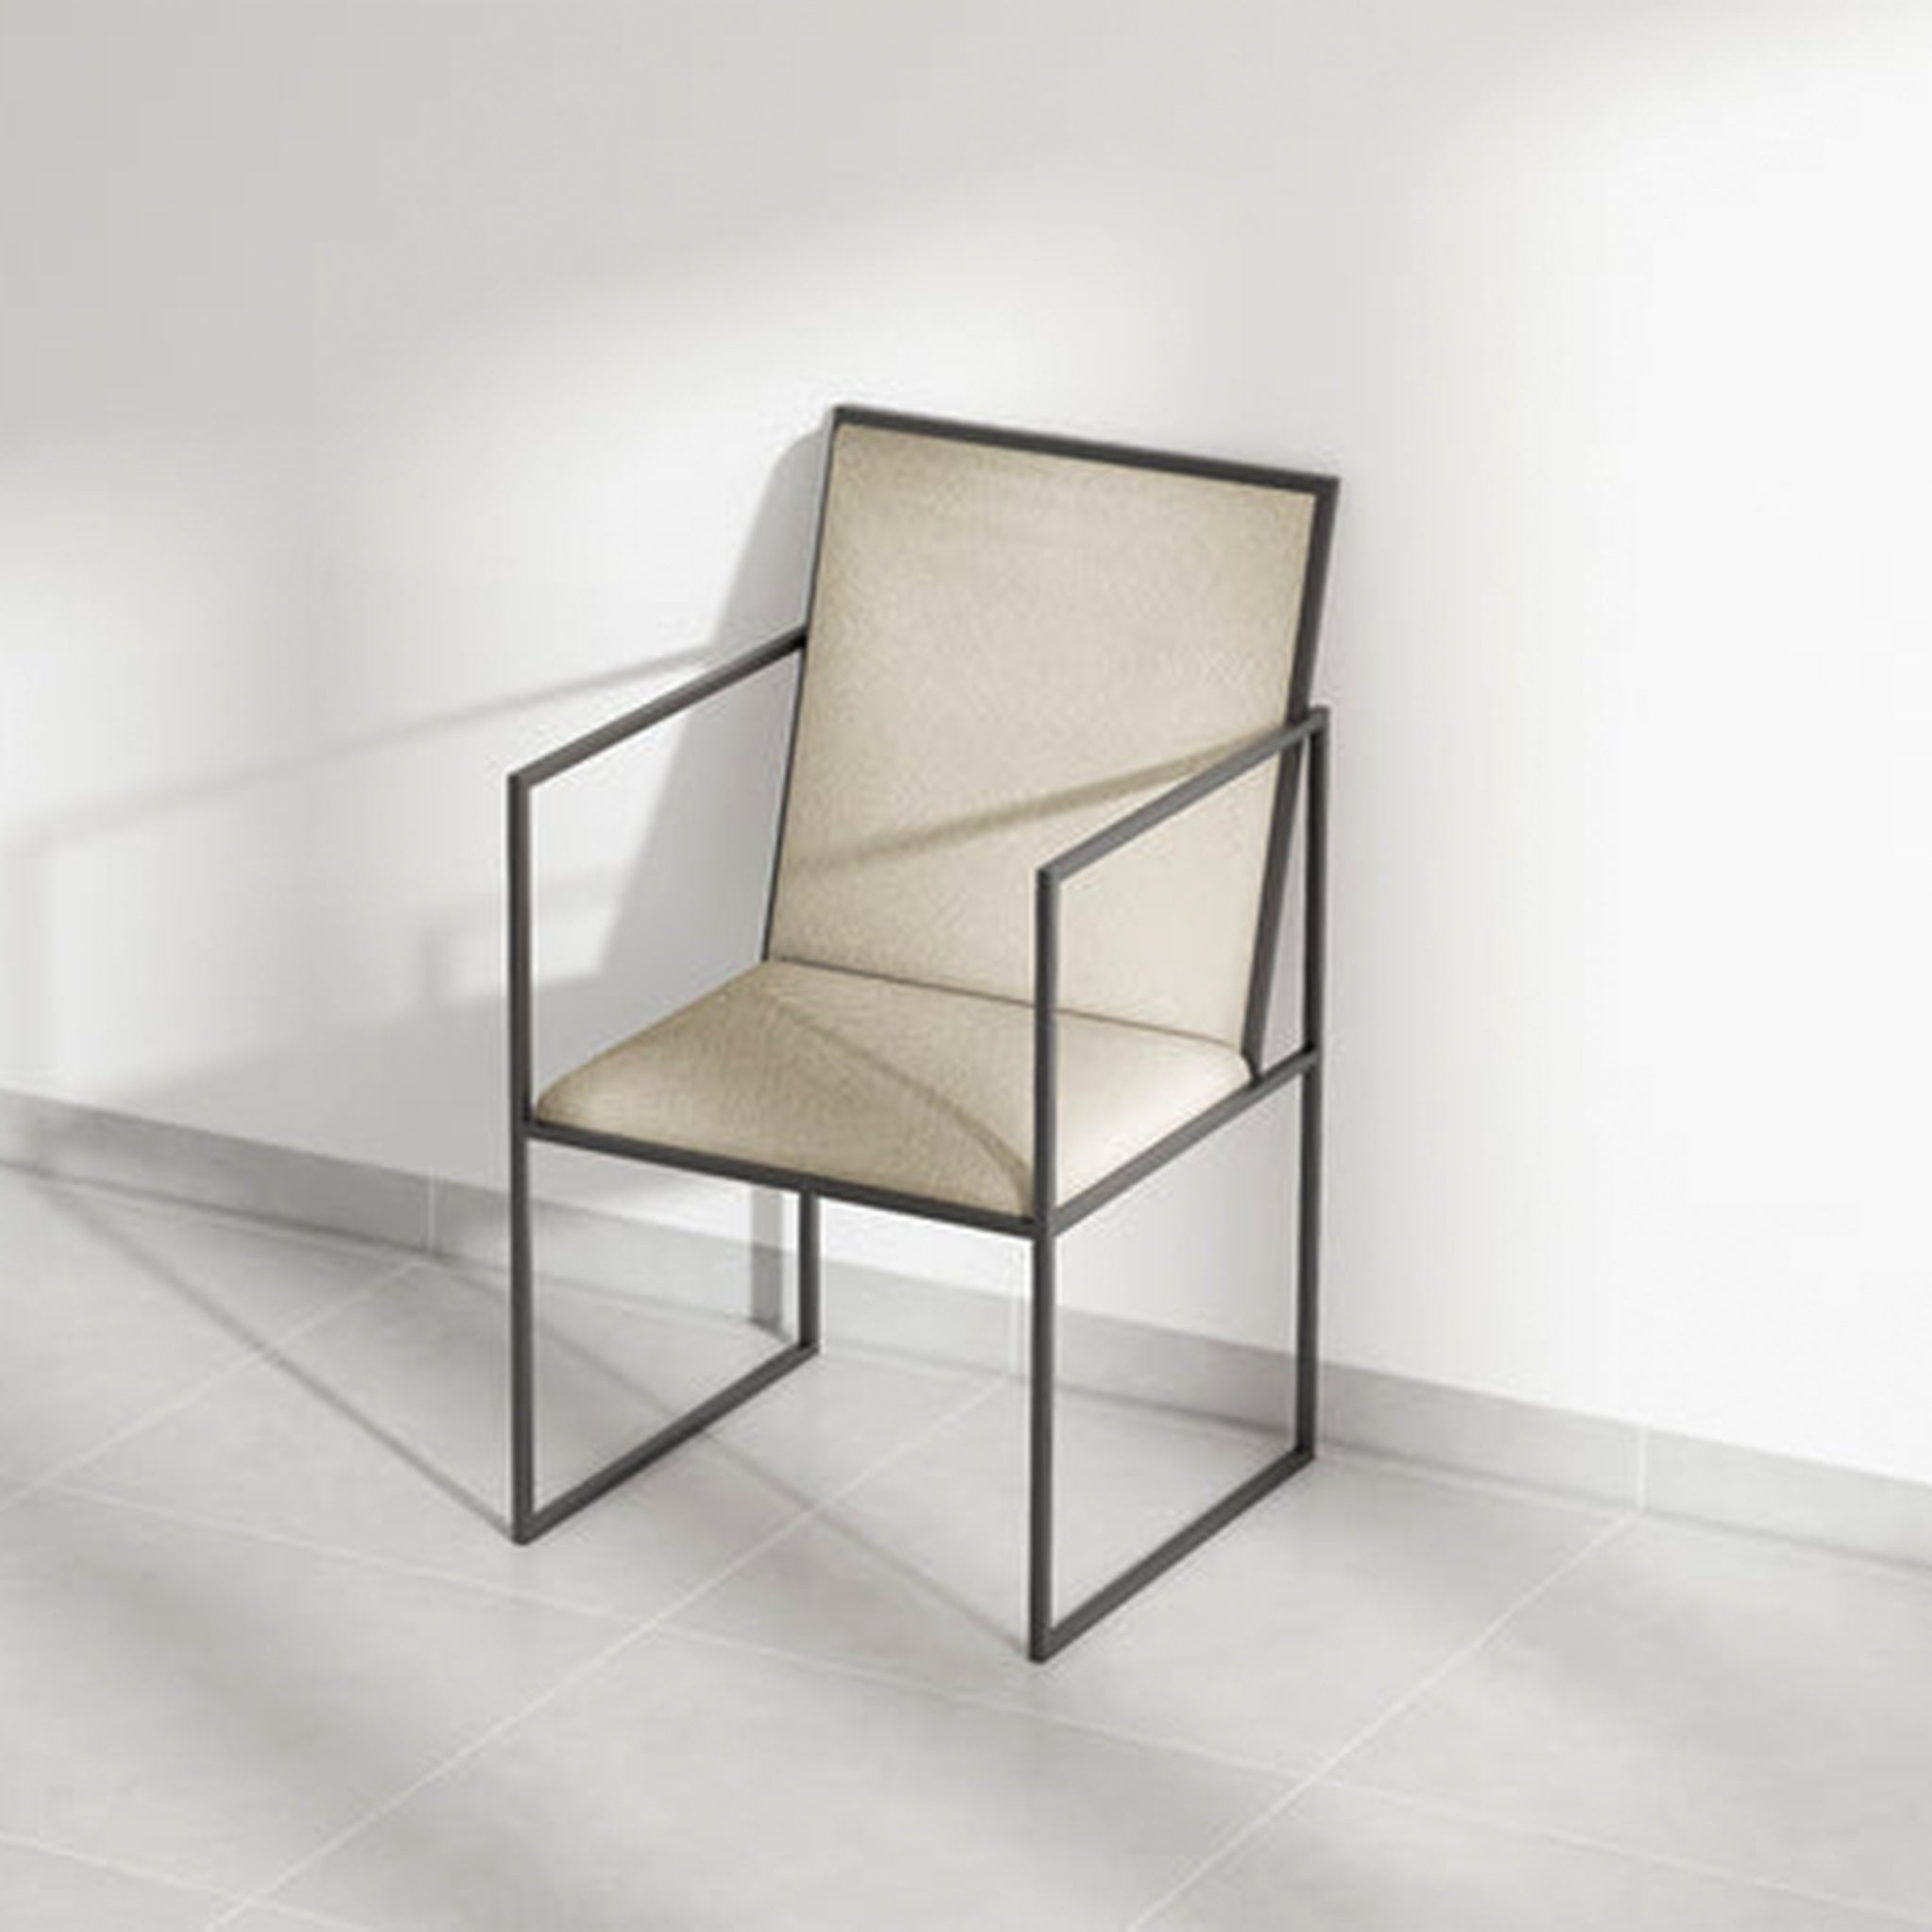 Modern dining chair with blue upholstery and metal frame